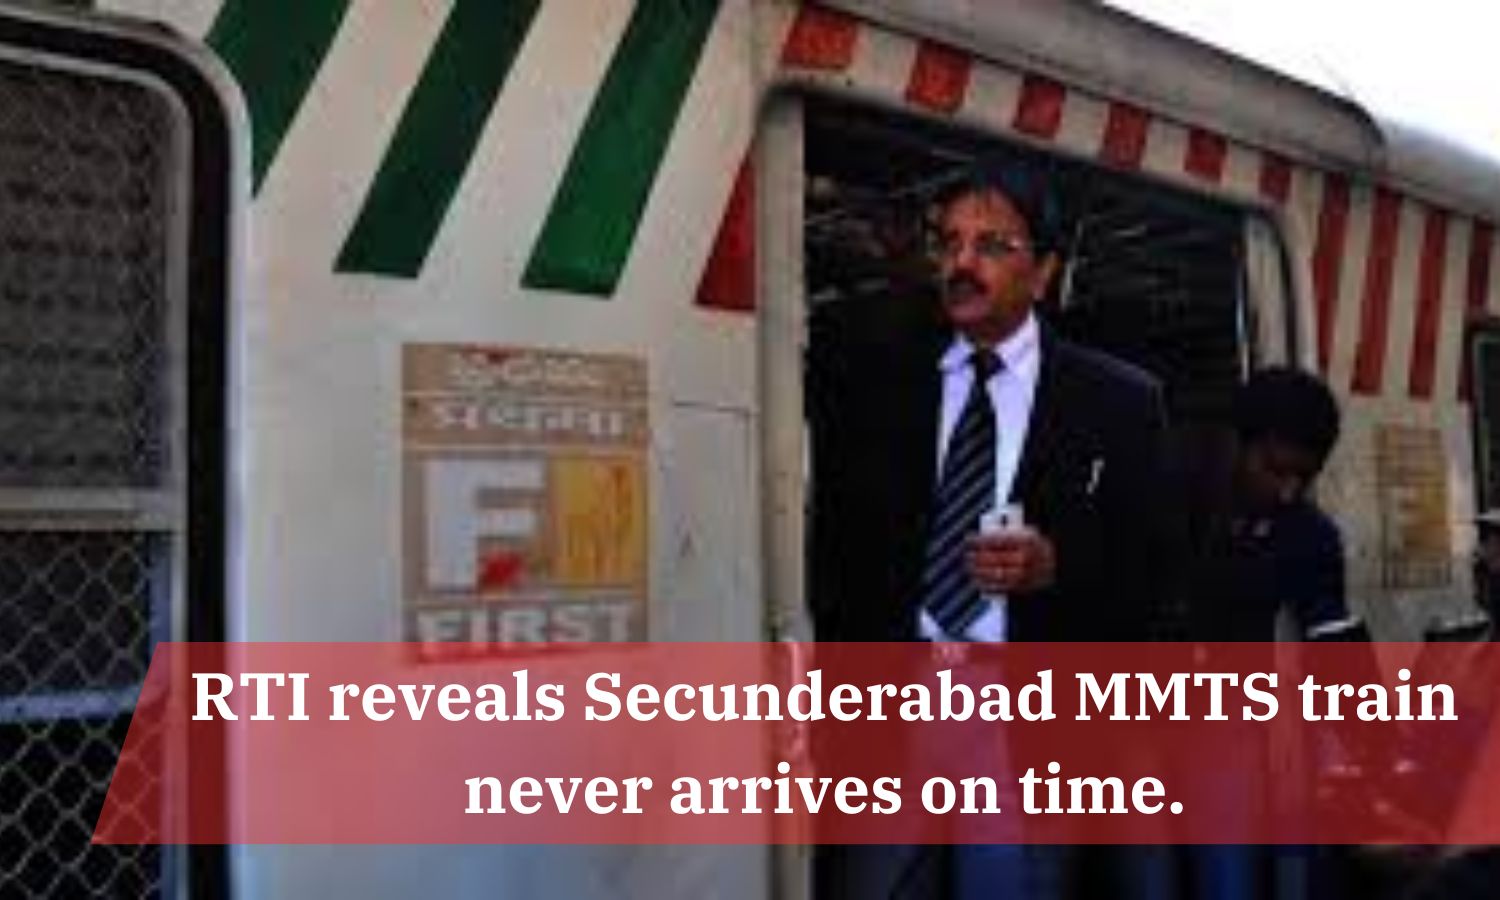 Rti Reveals Secunderabad Mmts Train Never Arrives On Time.